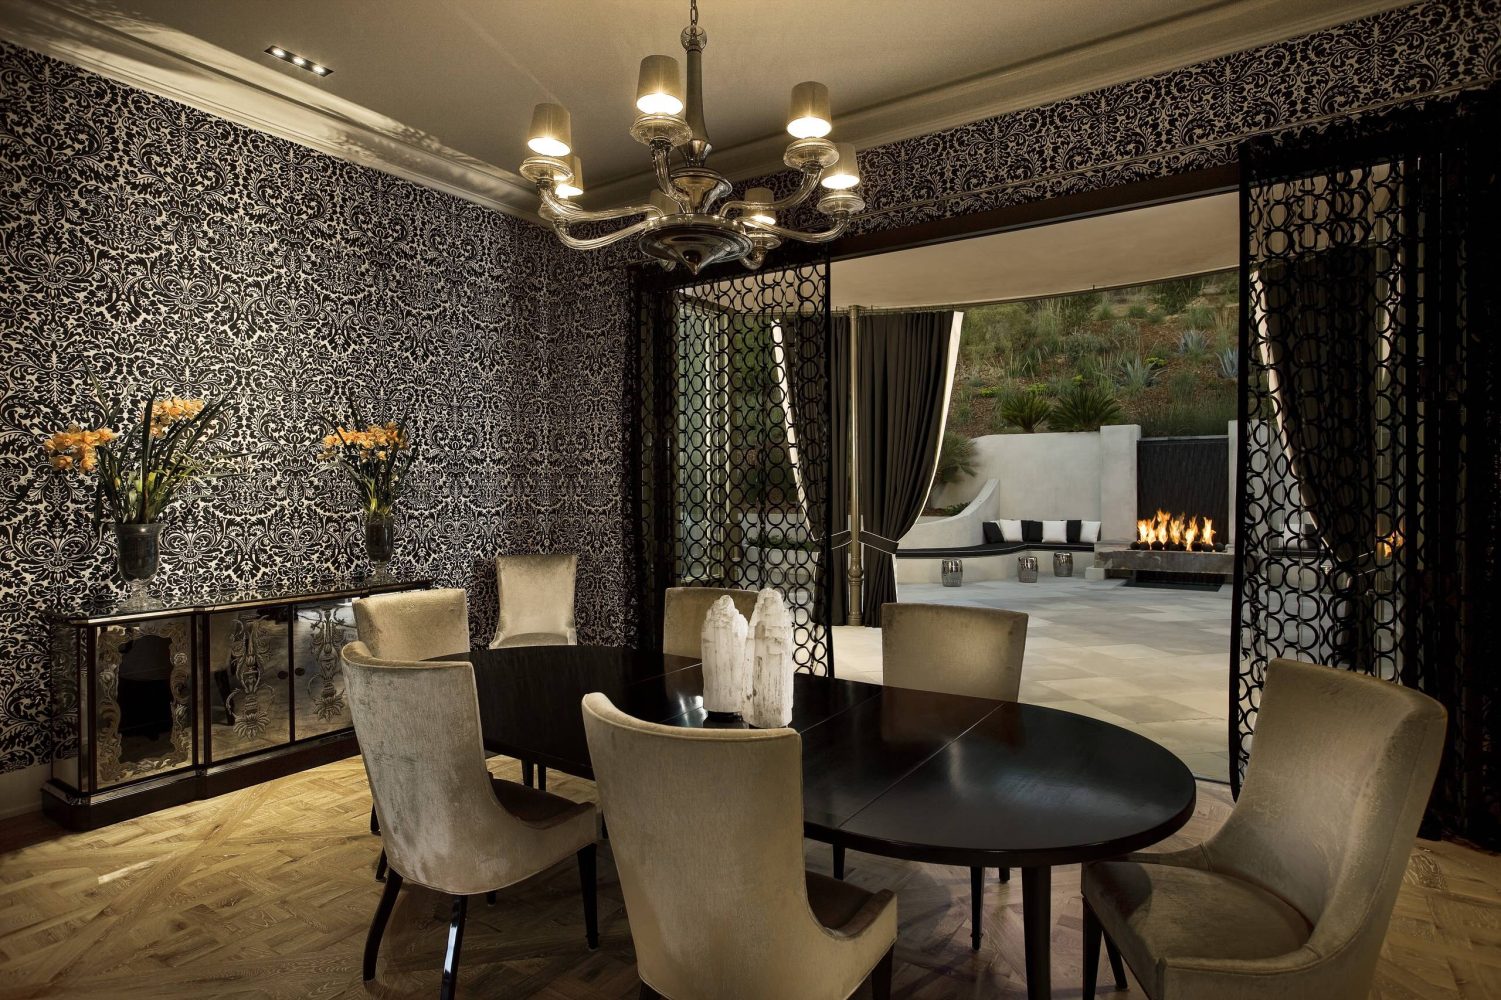 Hollywood style in interior decoration